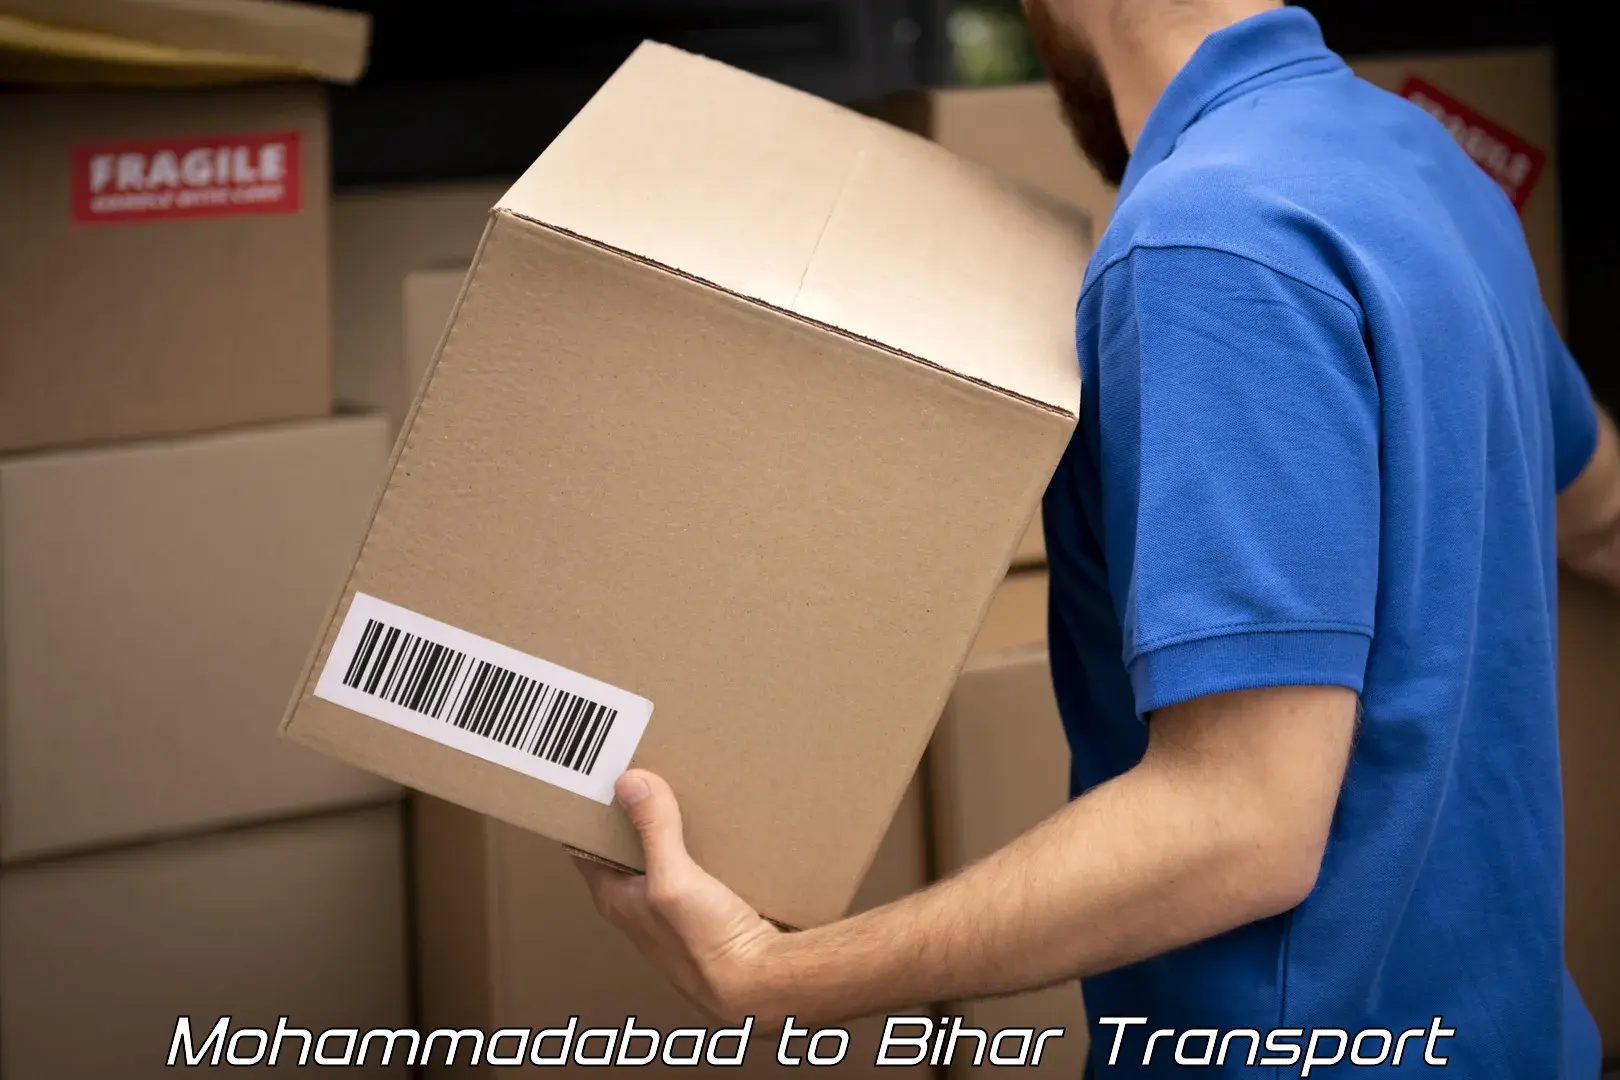 Part load transport service in India Mohammadabad to Bihar